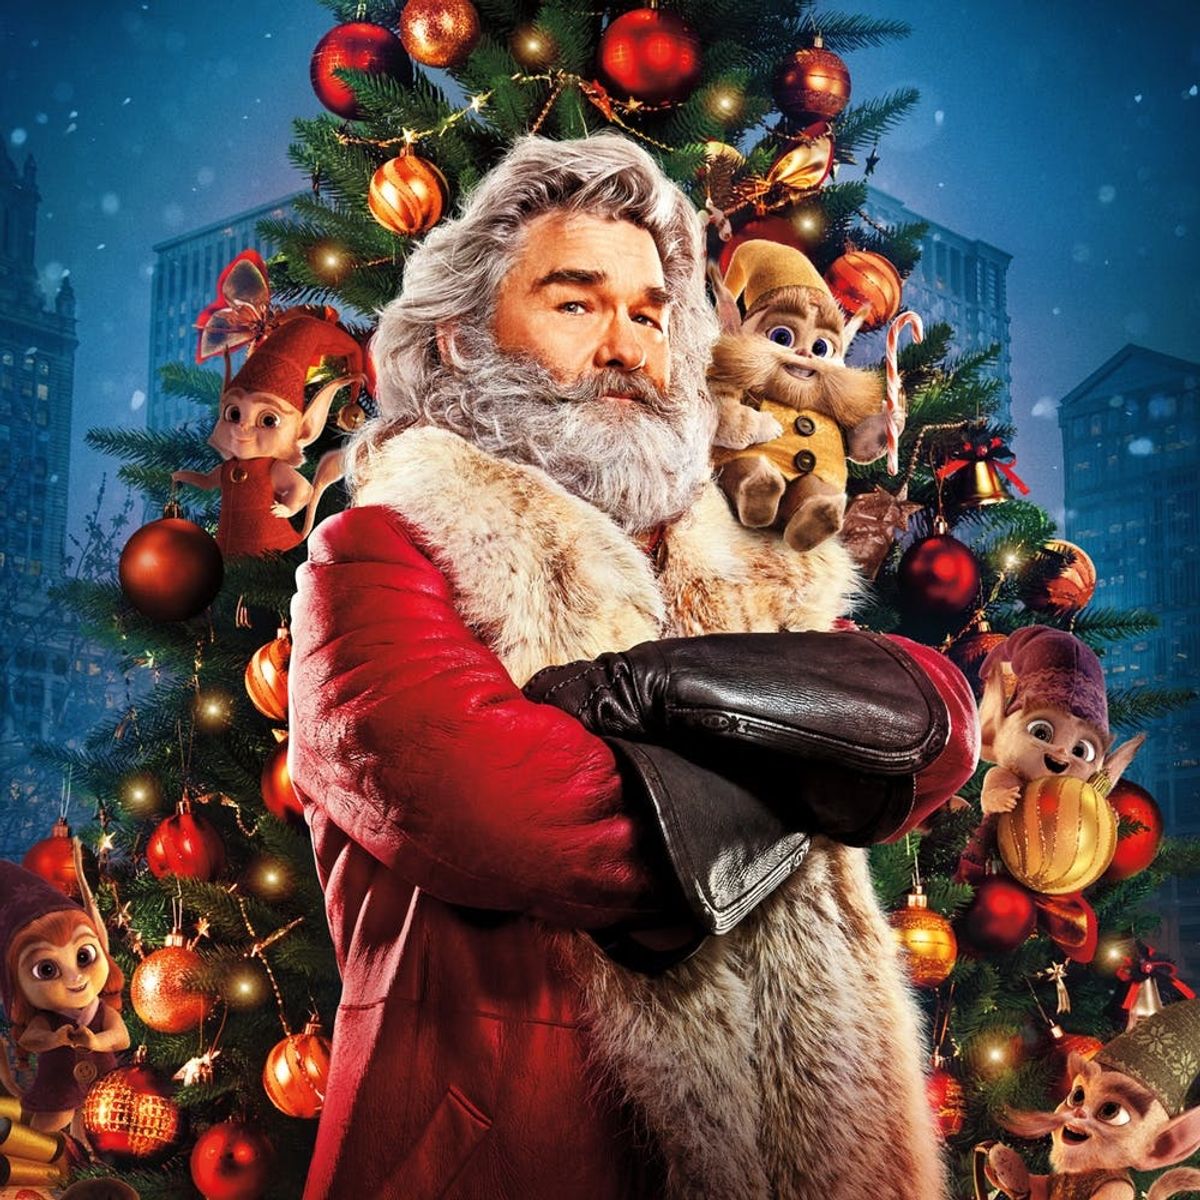 Netflix Just Released the Teaser for Its New Original Movie ‘The Christmas Chronicles’